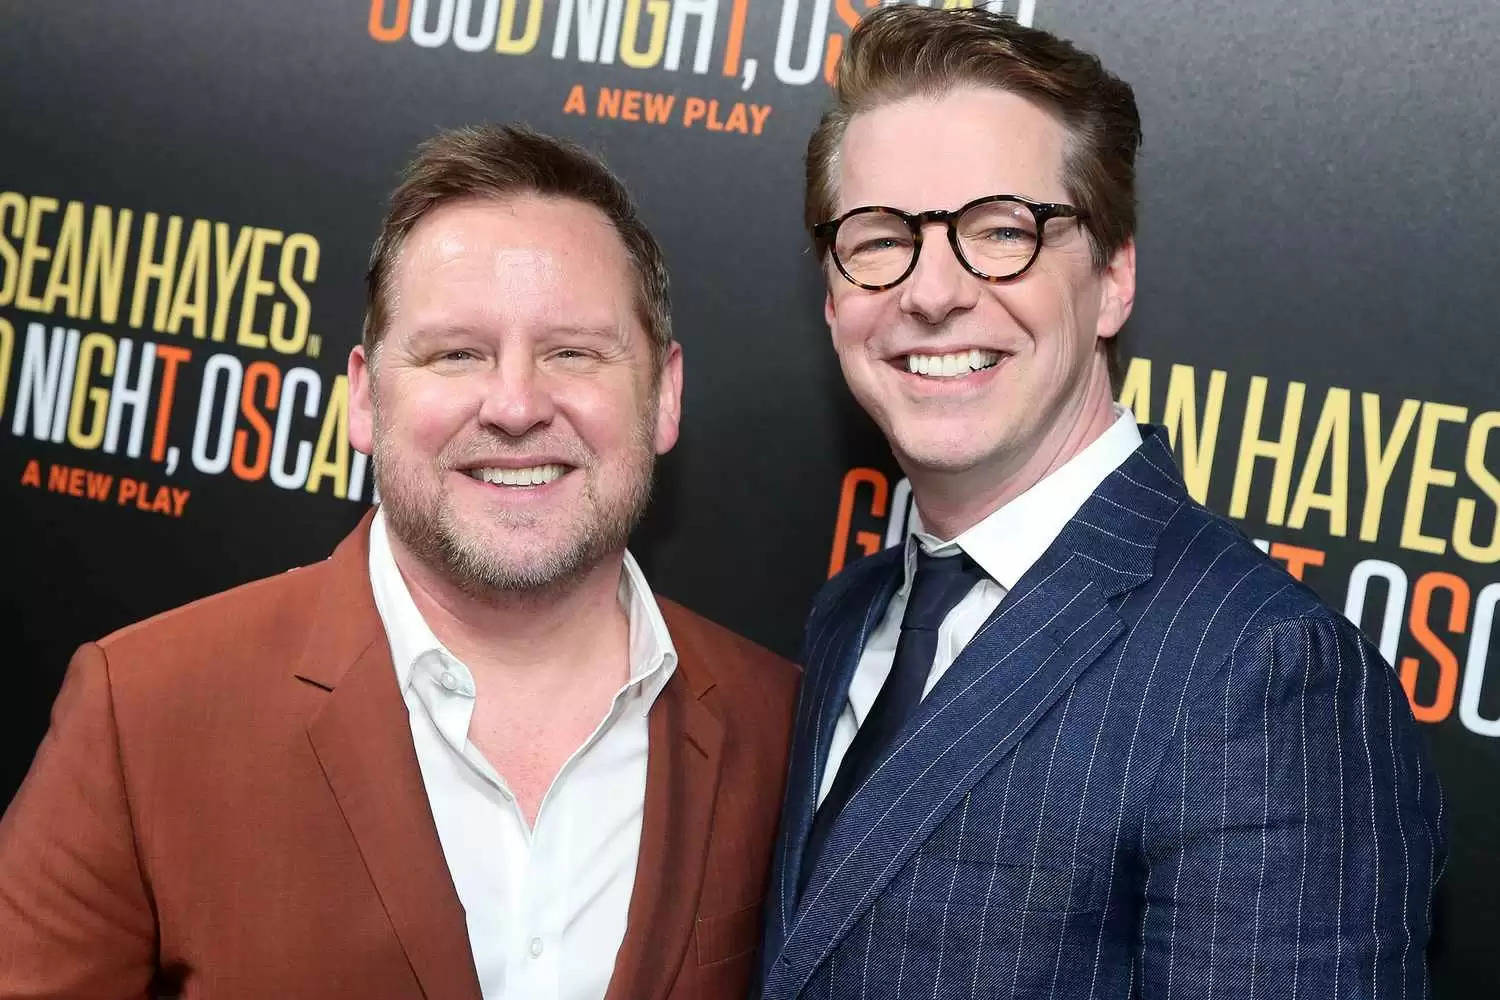 Tony Awards 2023 Sean Hayes wins Best Performance in a Play, calls